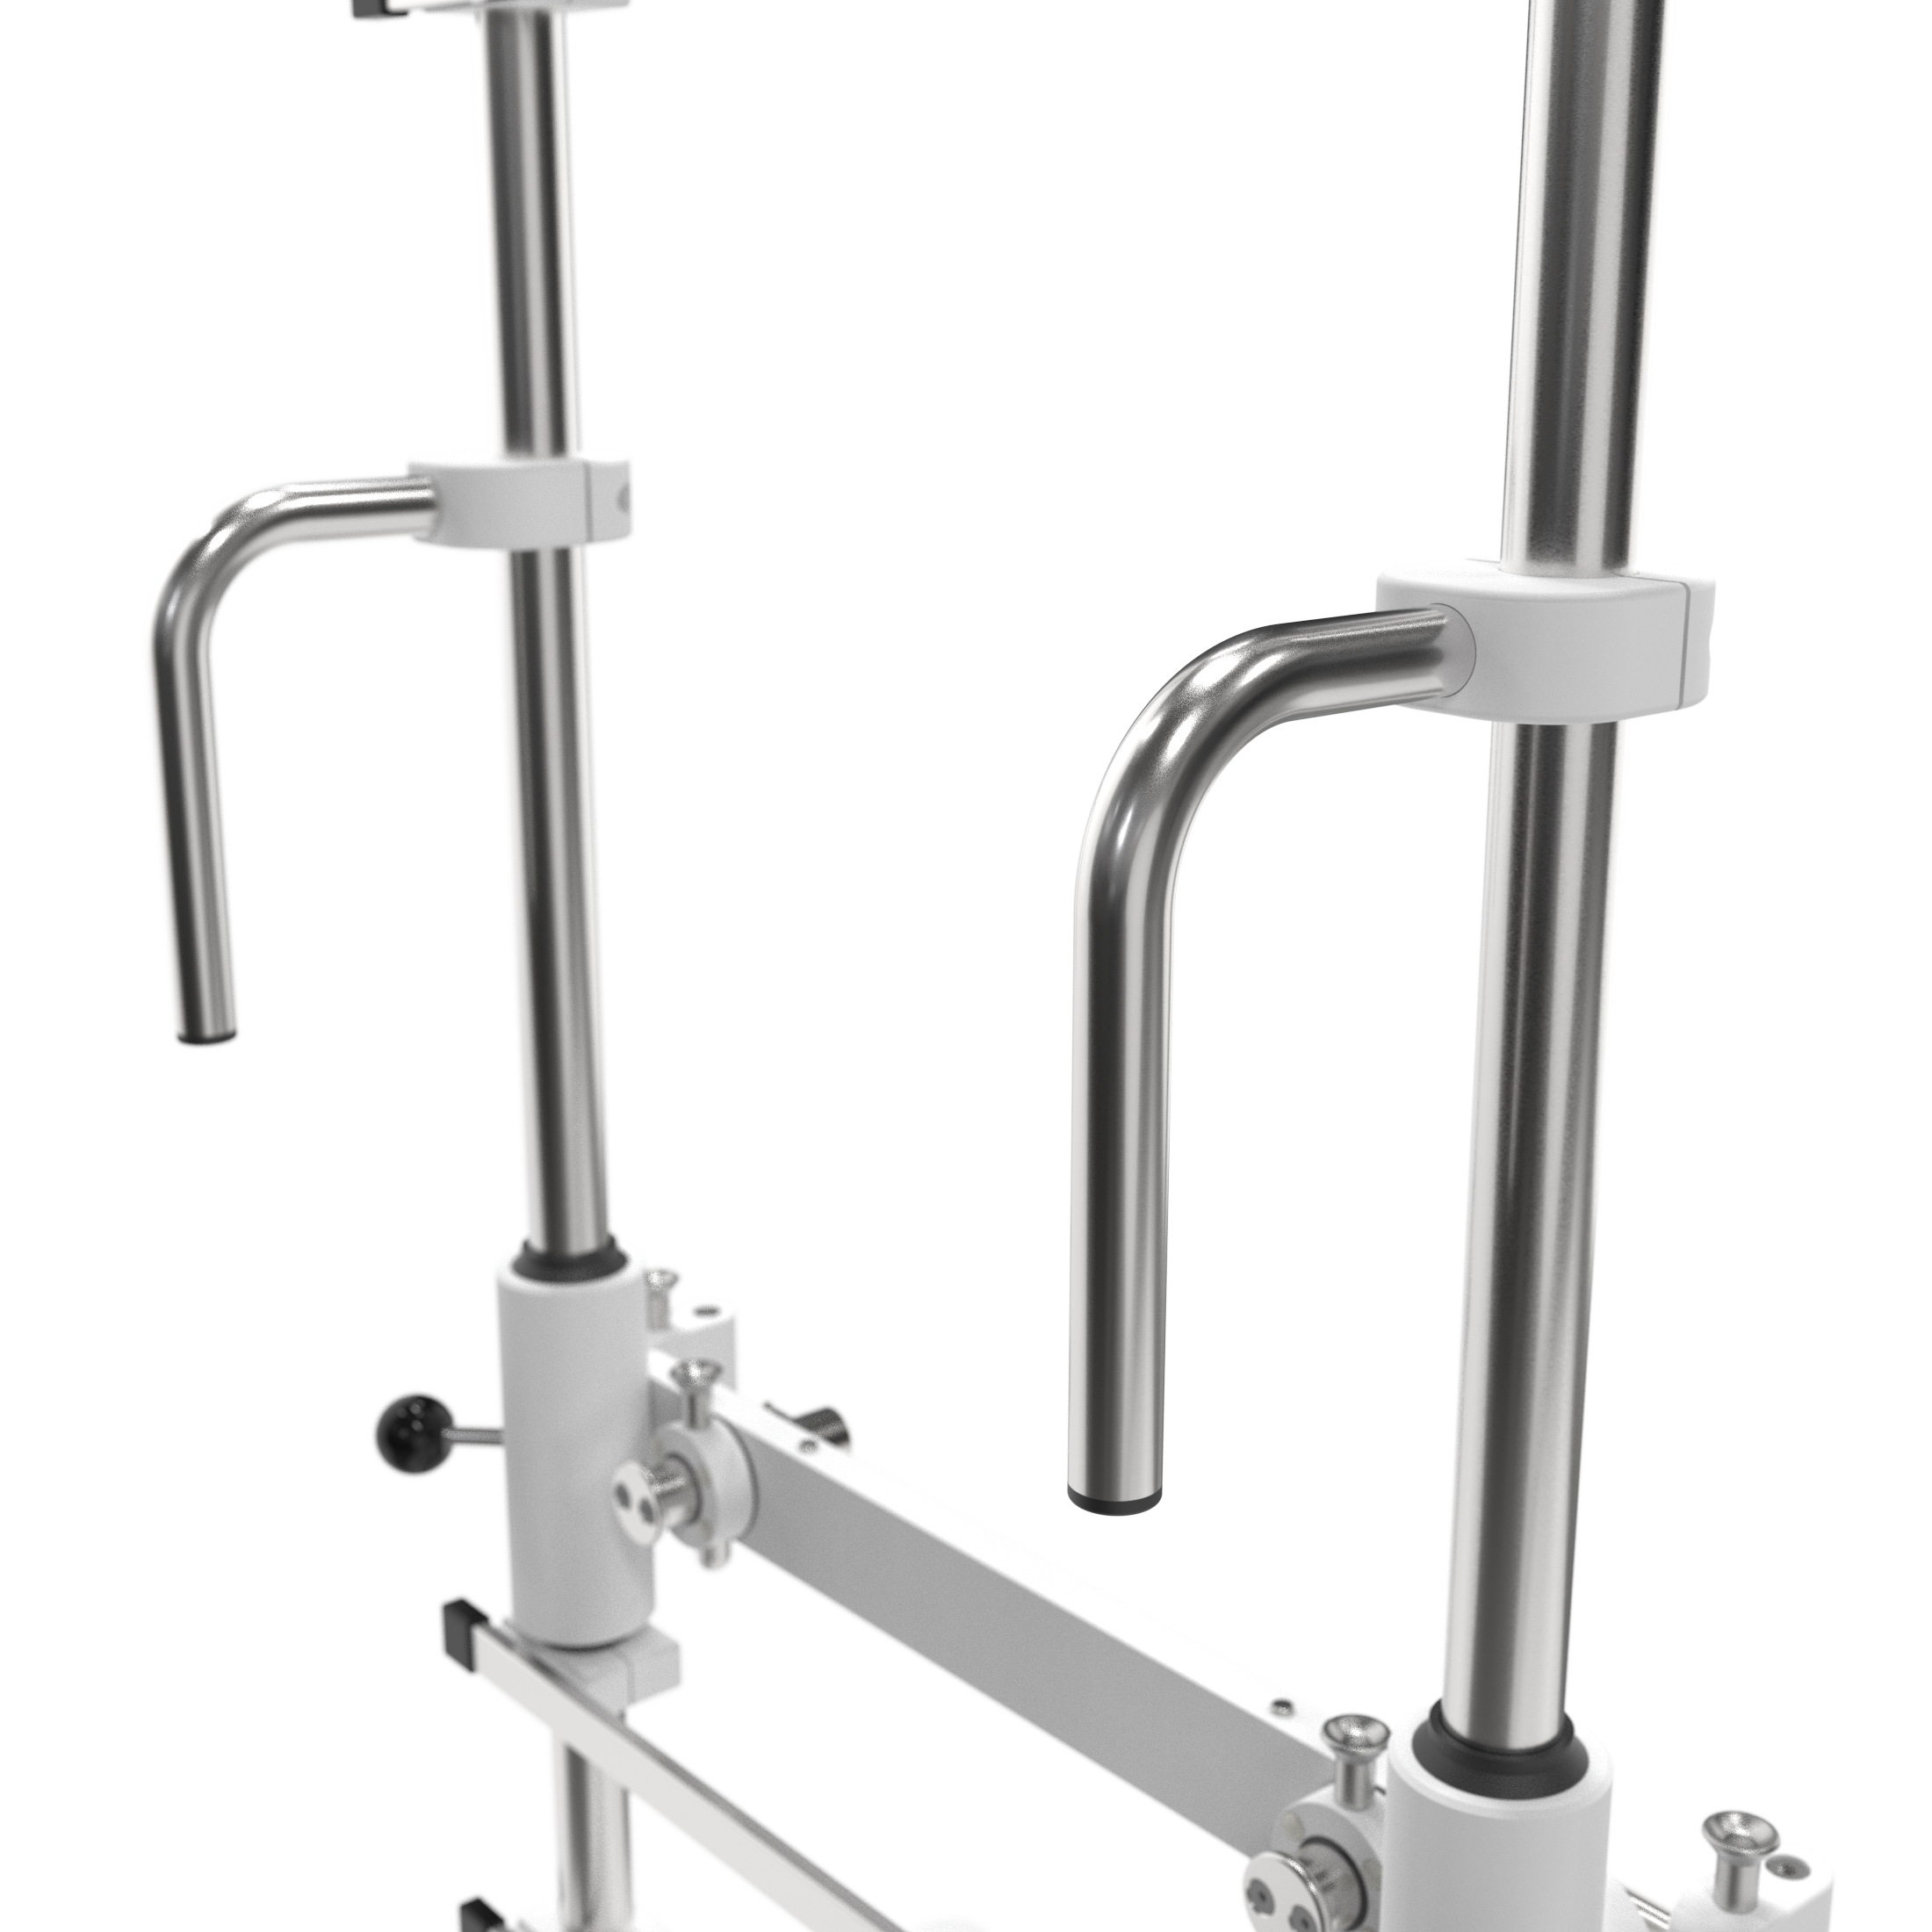 Preferred push handle for docking cart